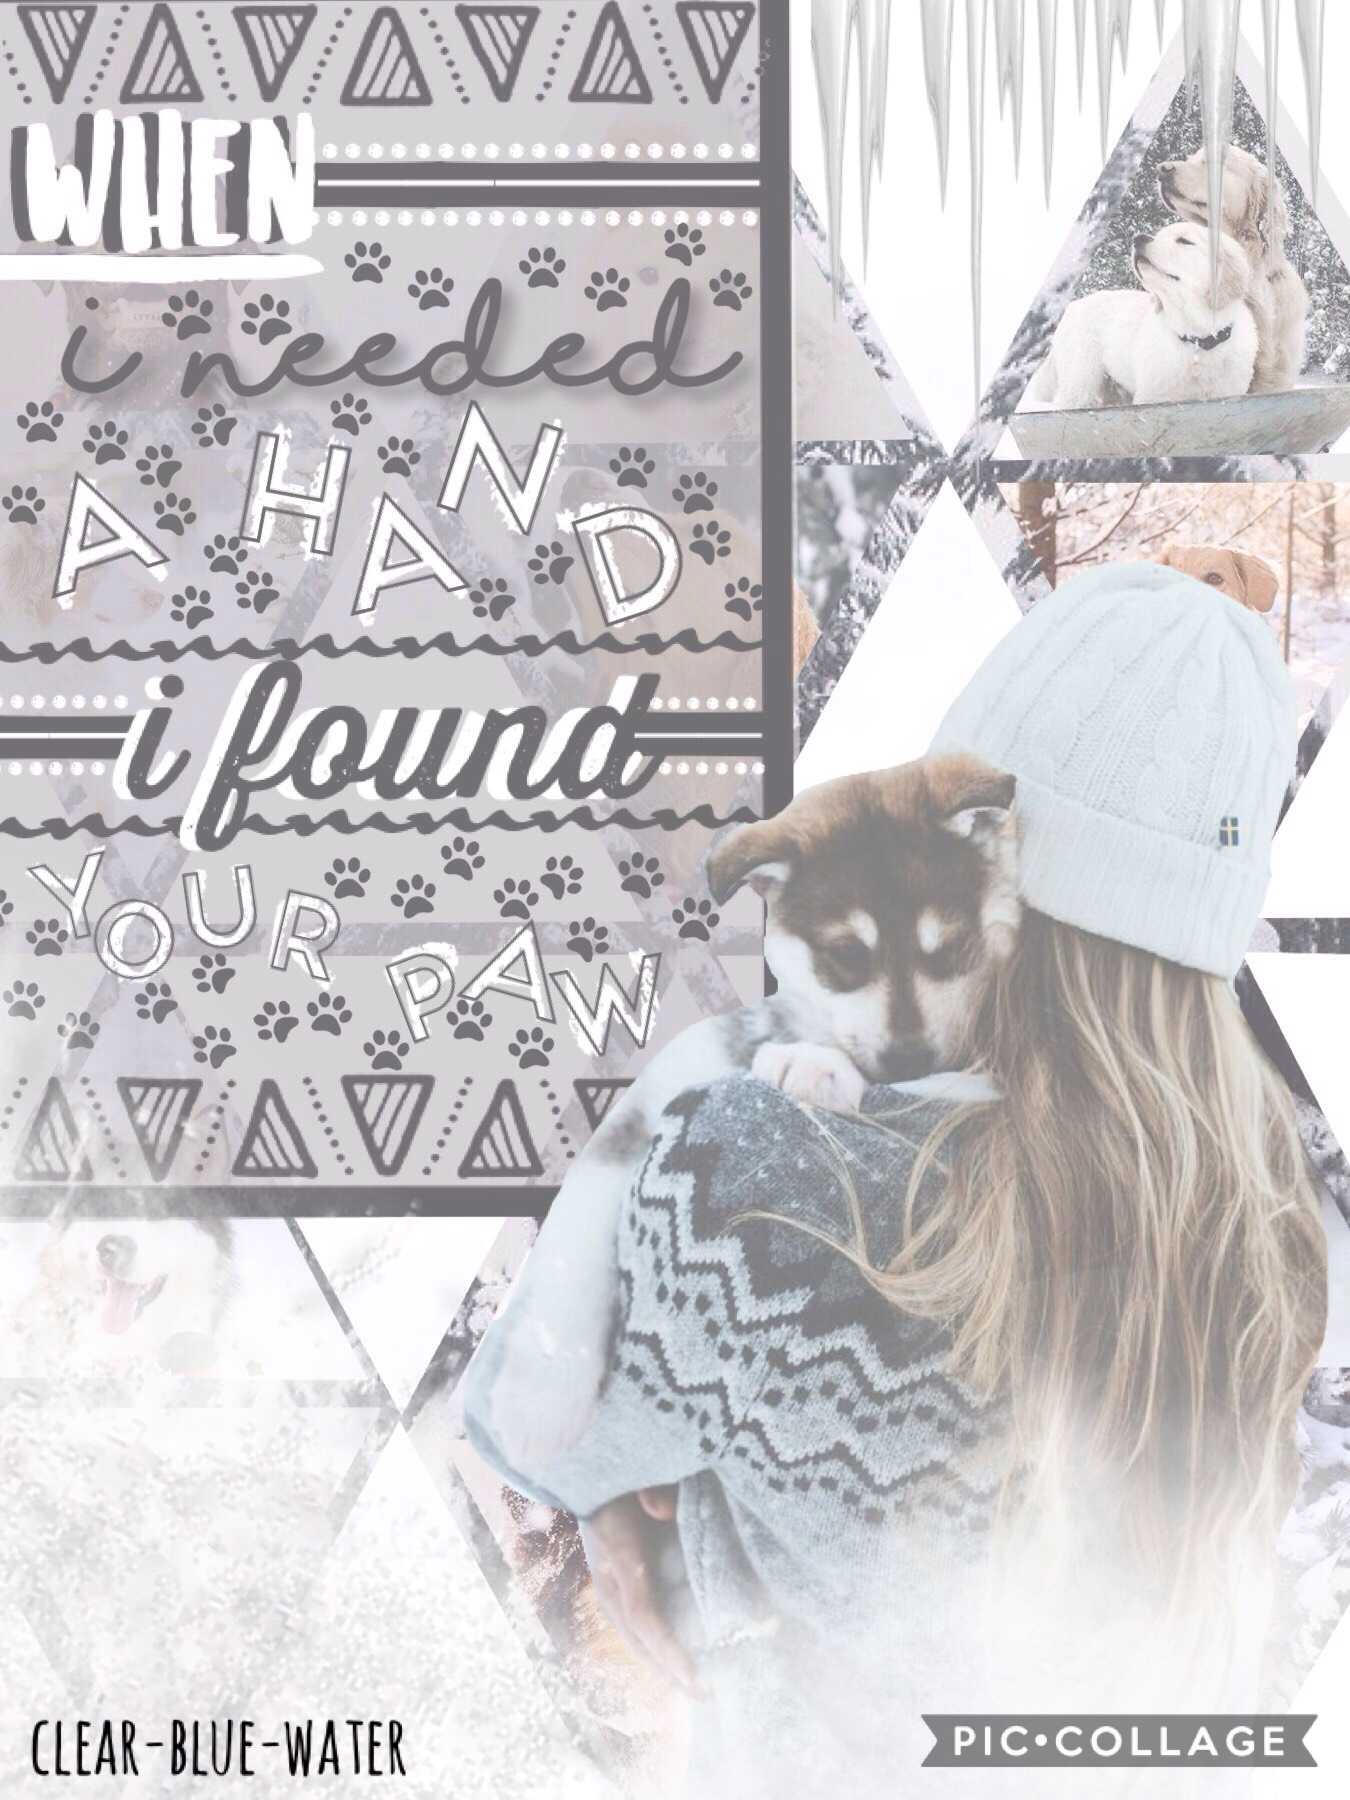 ❄️T A P❄️
Made this for The Battle of The Collagers on -SparklingStars-
QOTD: 🐶 or 🐱
AOTD: 🐶